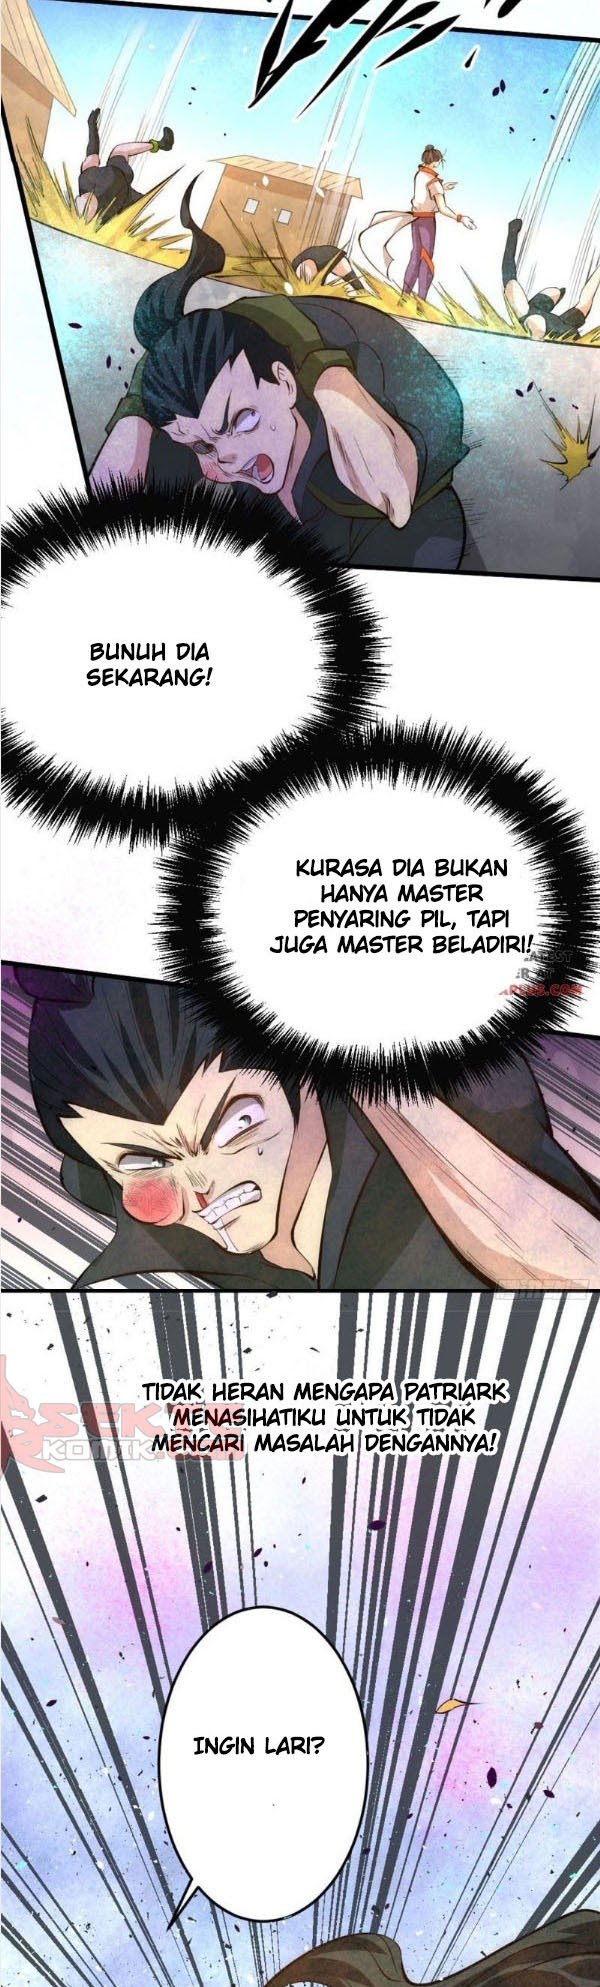 Almighty Master Chapter 63